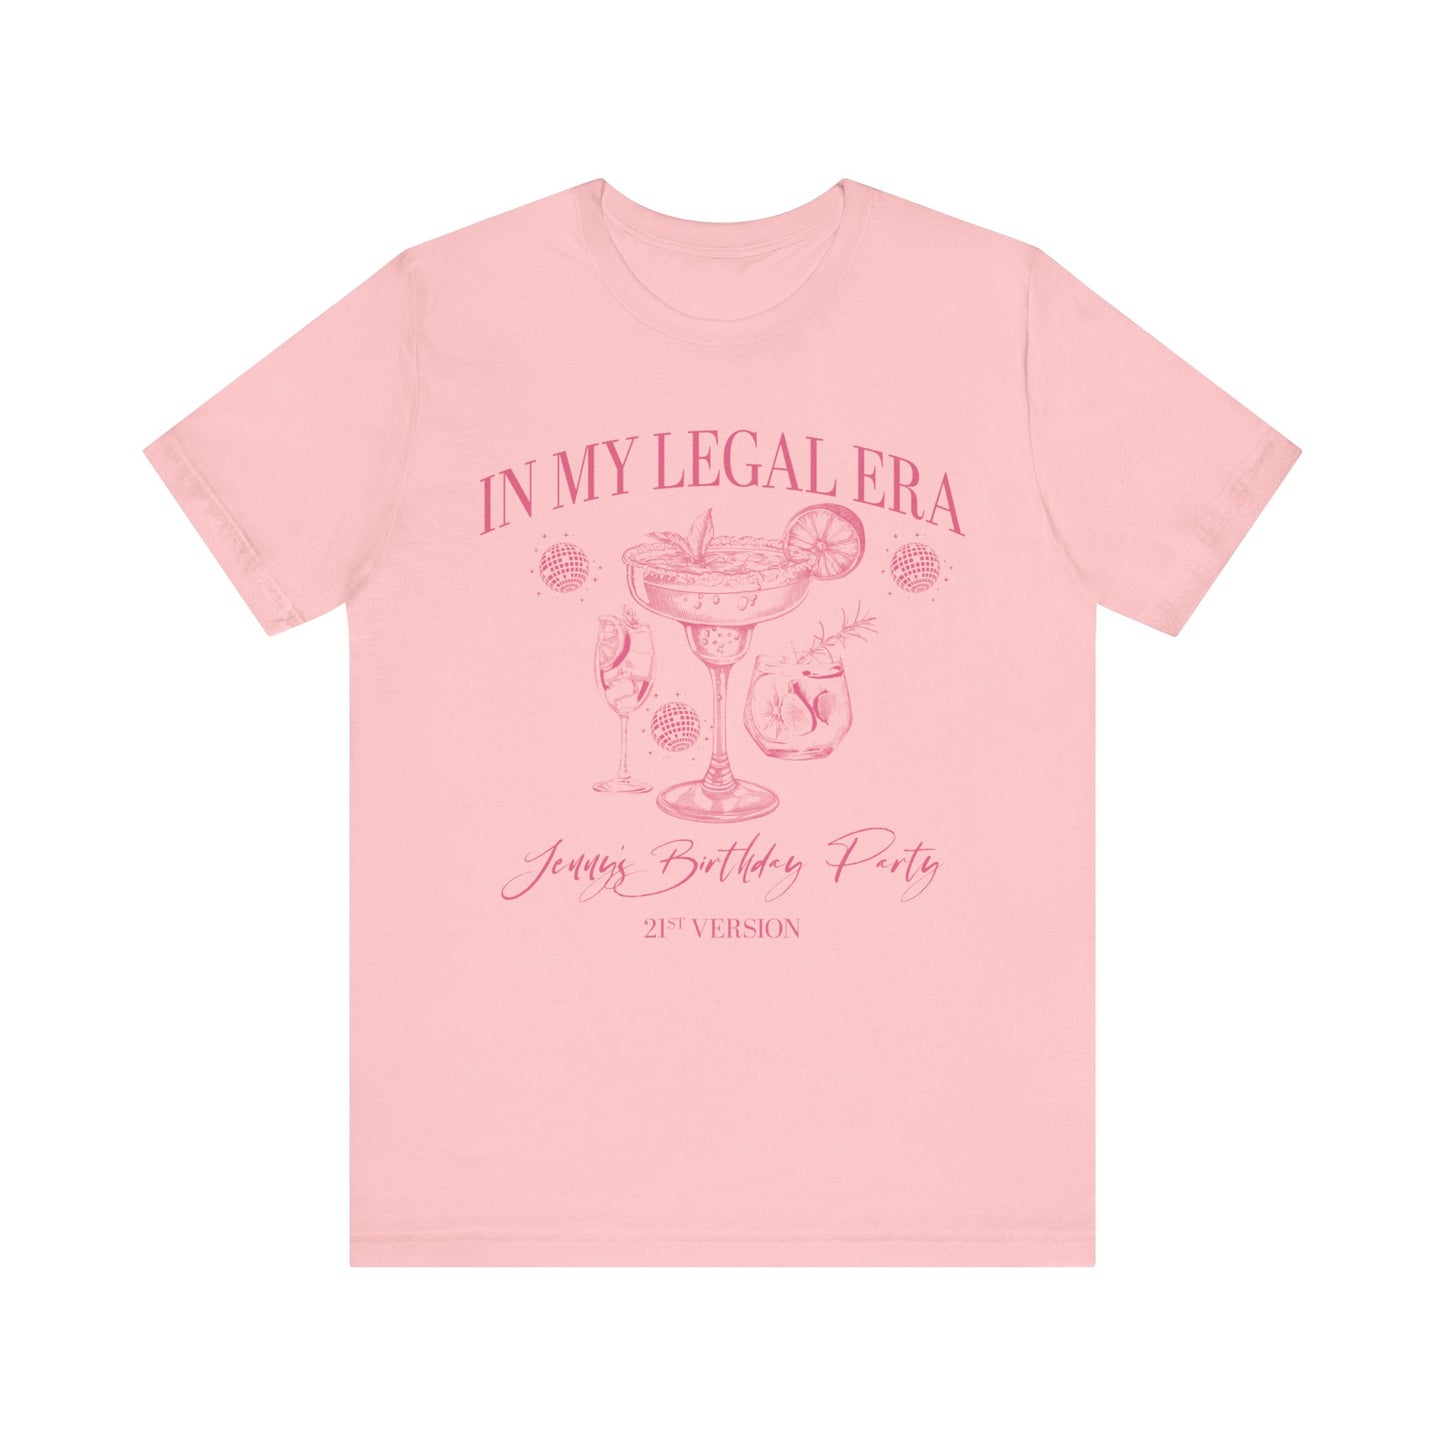 21st Birthday Shirt, In My Legal Era Shirt, Funny 21st Birthday Shirts, Gift for 21st Birthday, 21st Birthday Shirts for Group, T1568